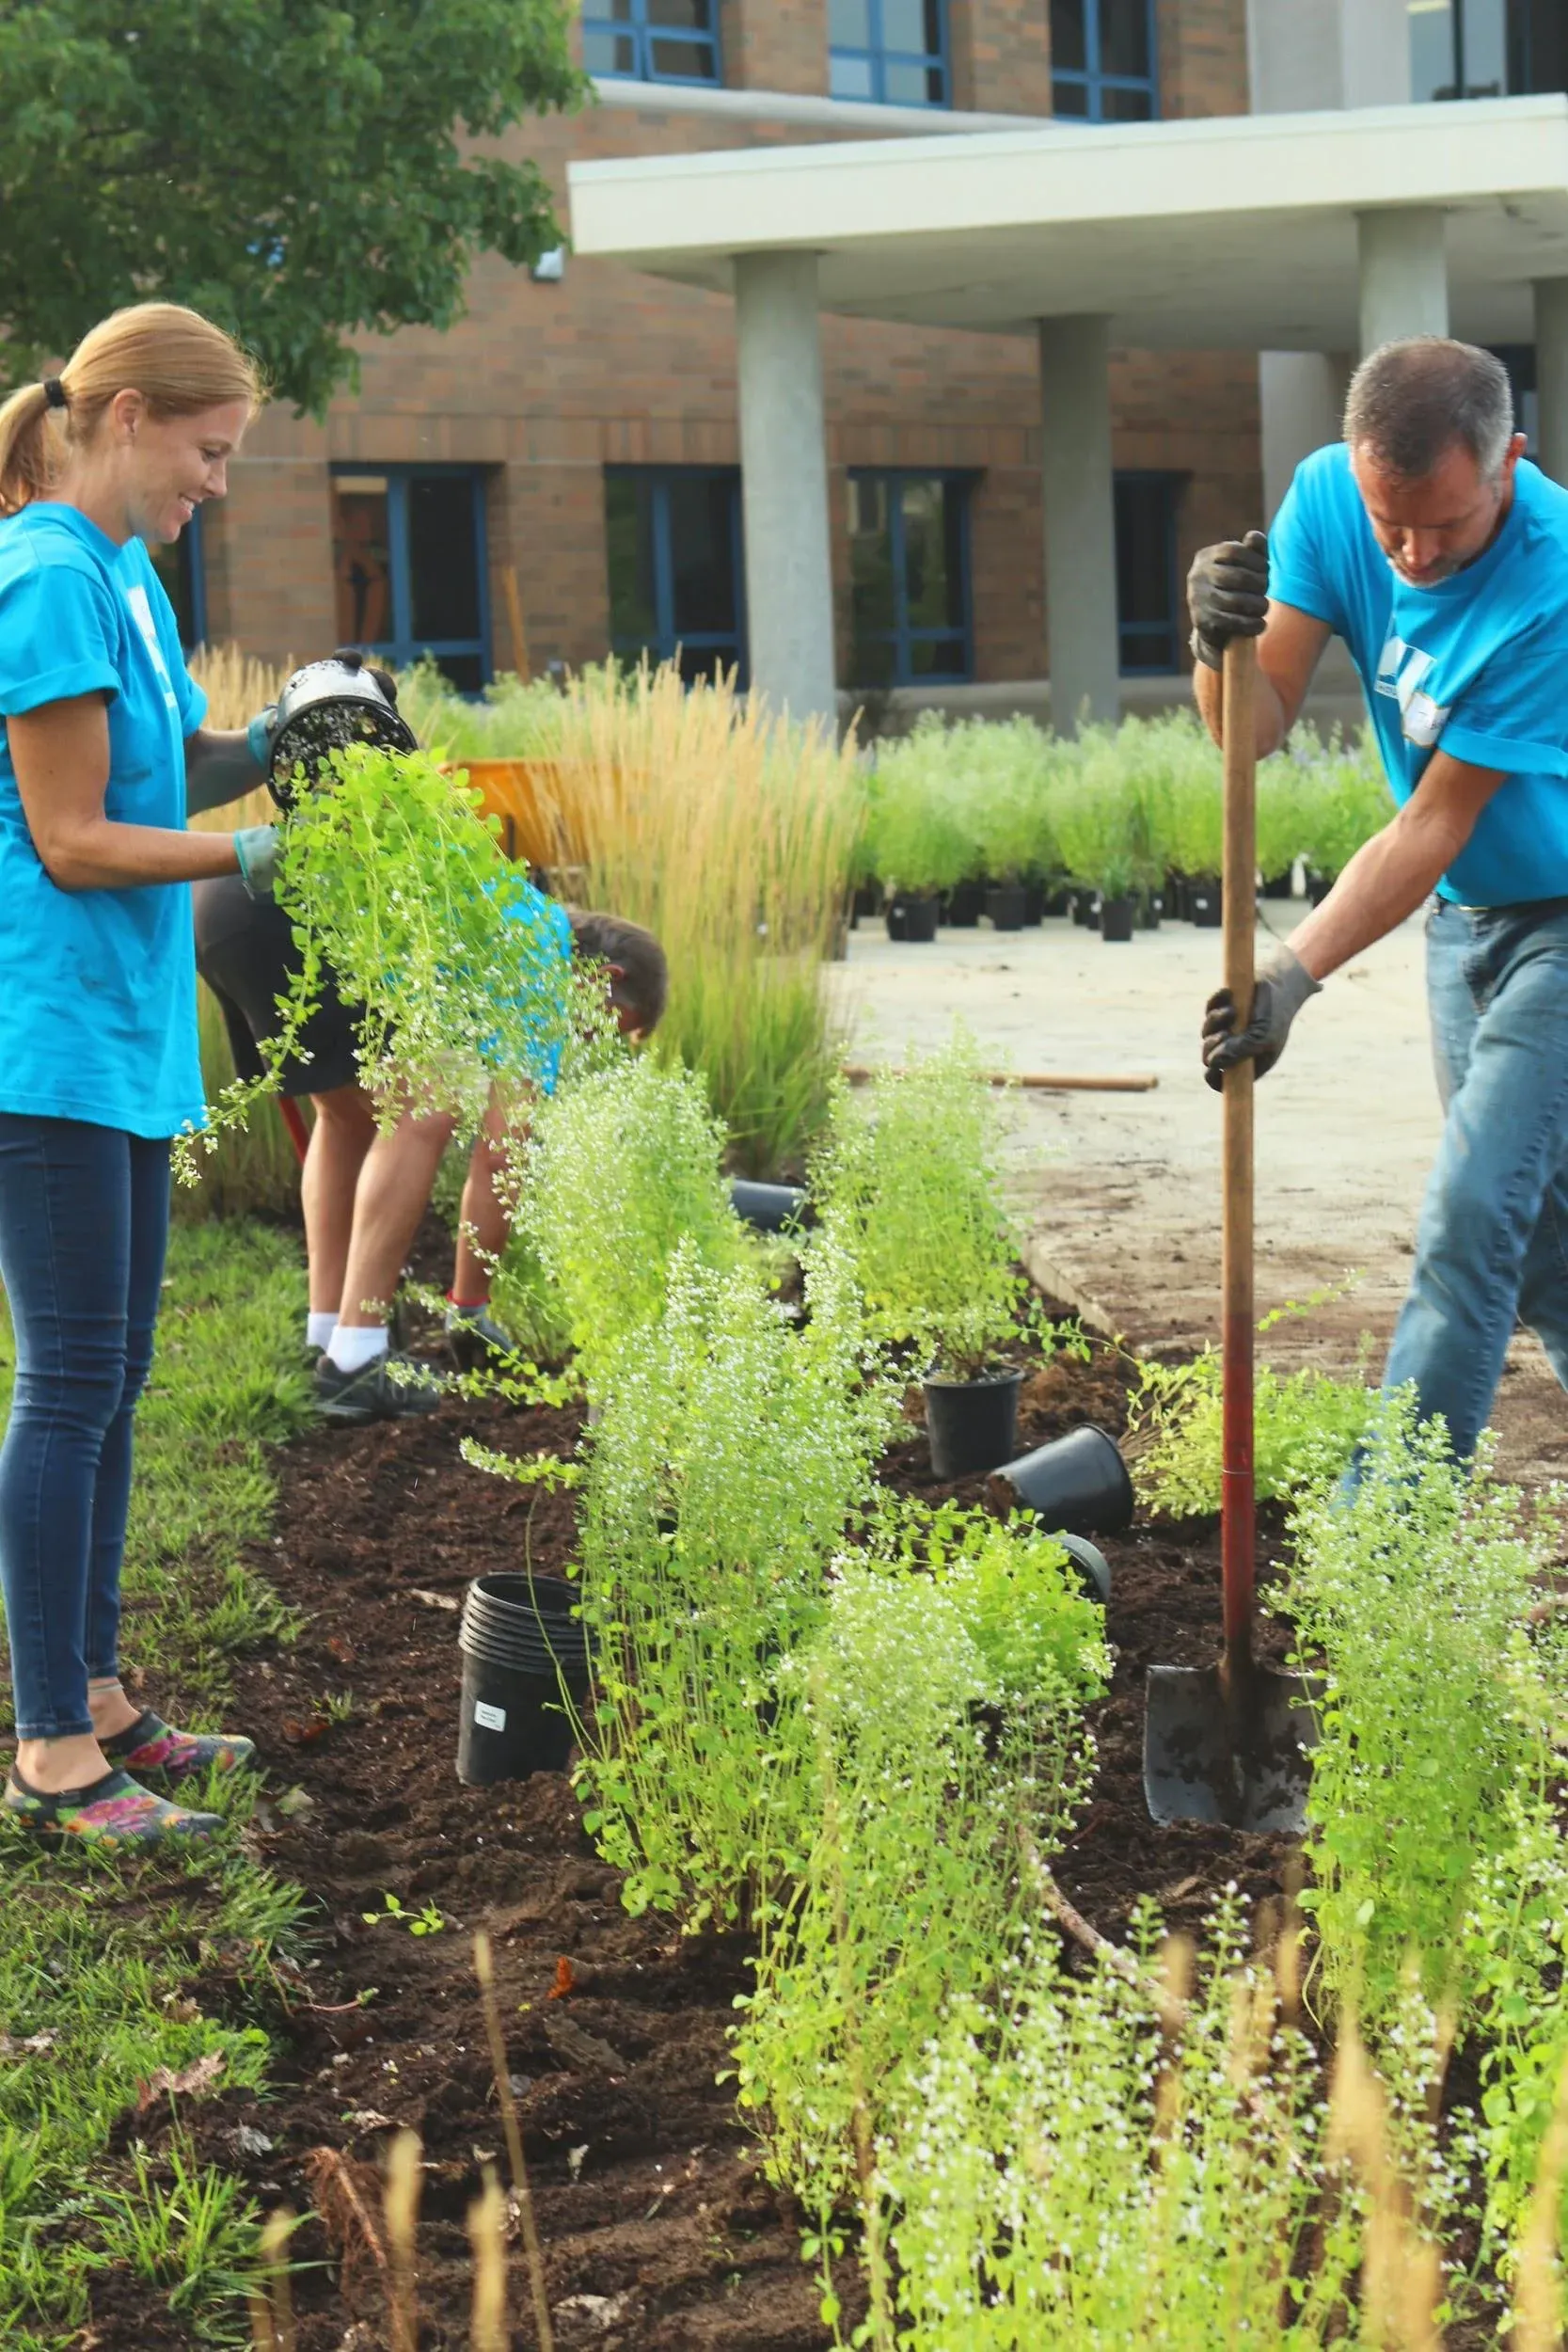 Three adult volunteers plant during a beautification project of some kind. Research indicates homeschooled kids volunteer and contribute to their community at higher rates than their institutionally educated peers.